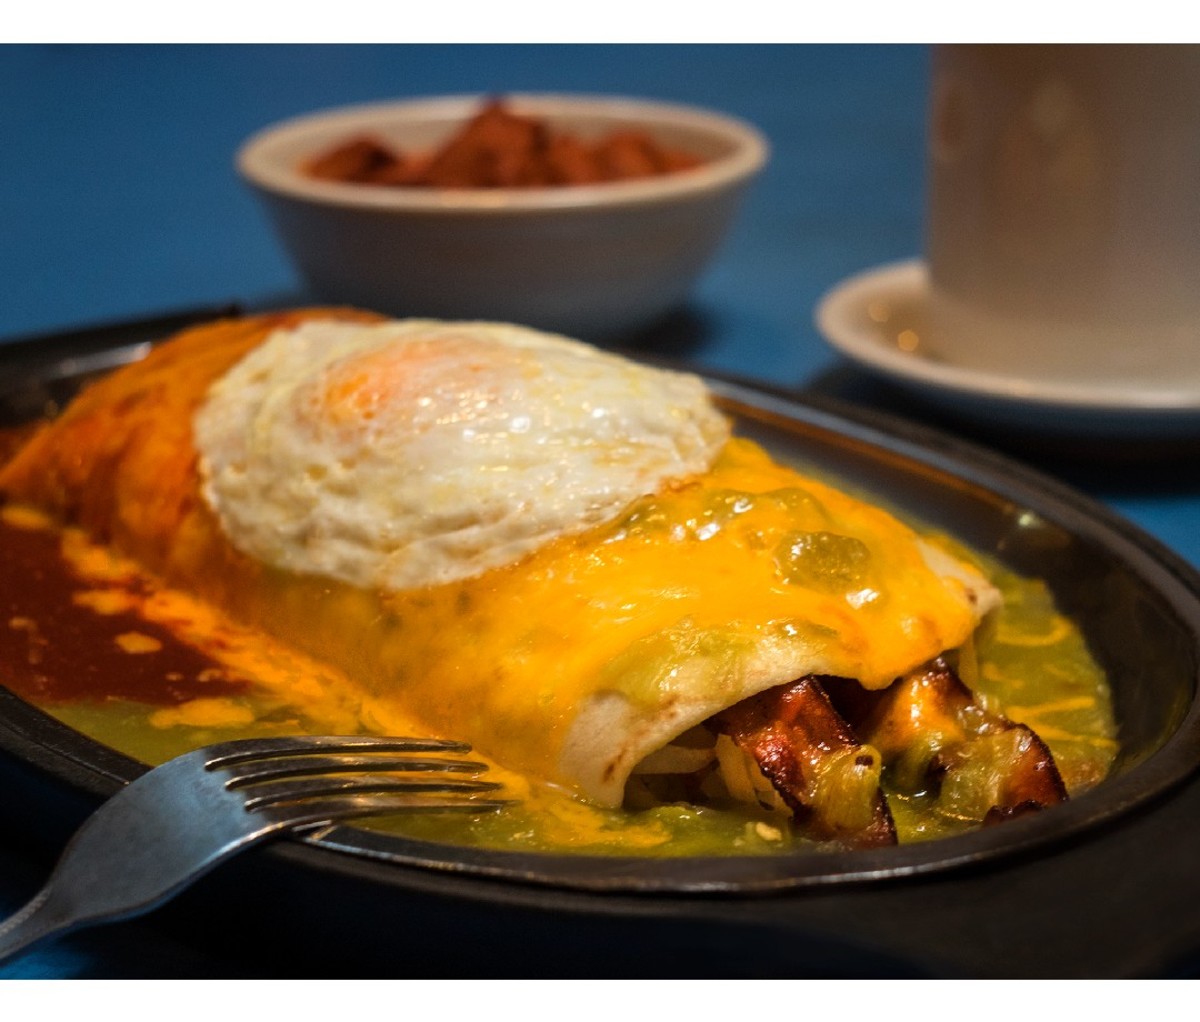 Cheese smothered burrito with a fried egg on top from Tia Sophia’s